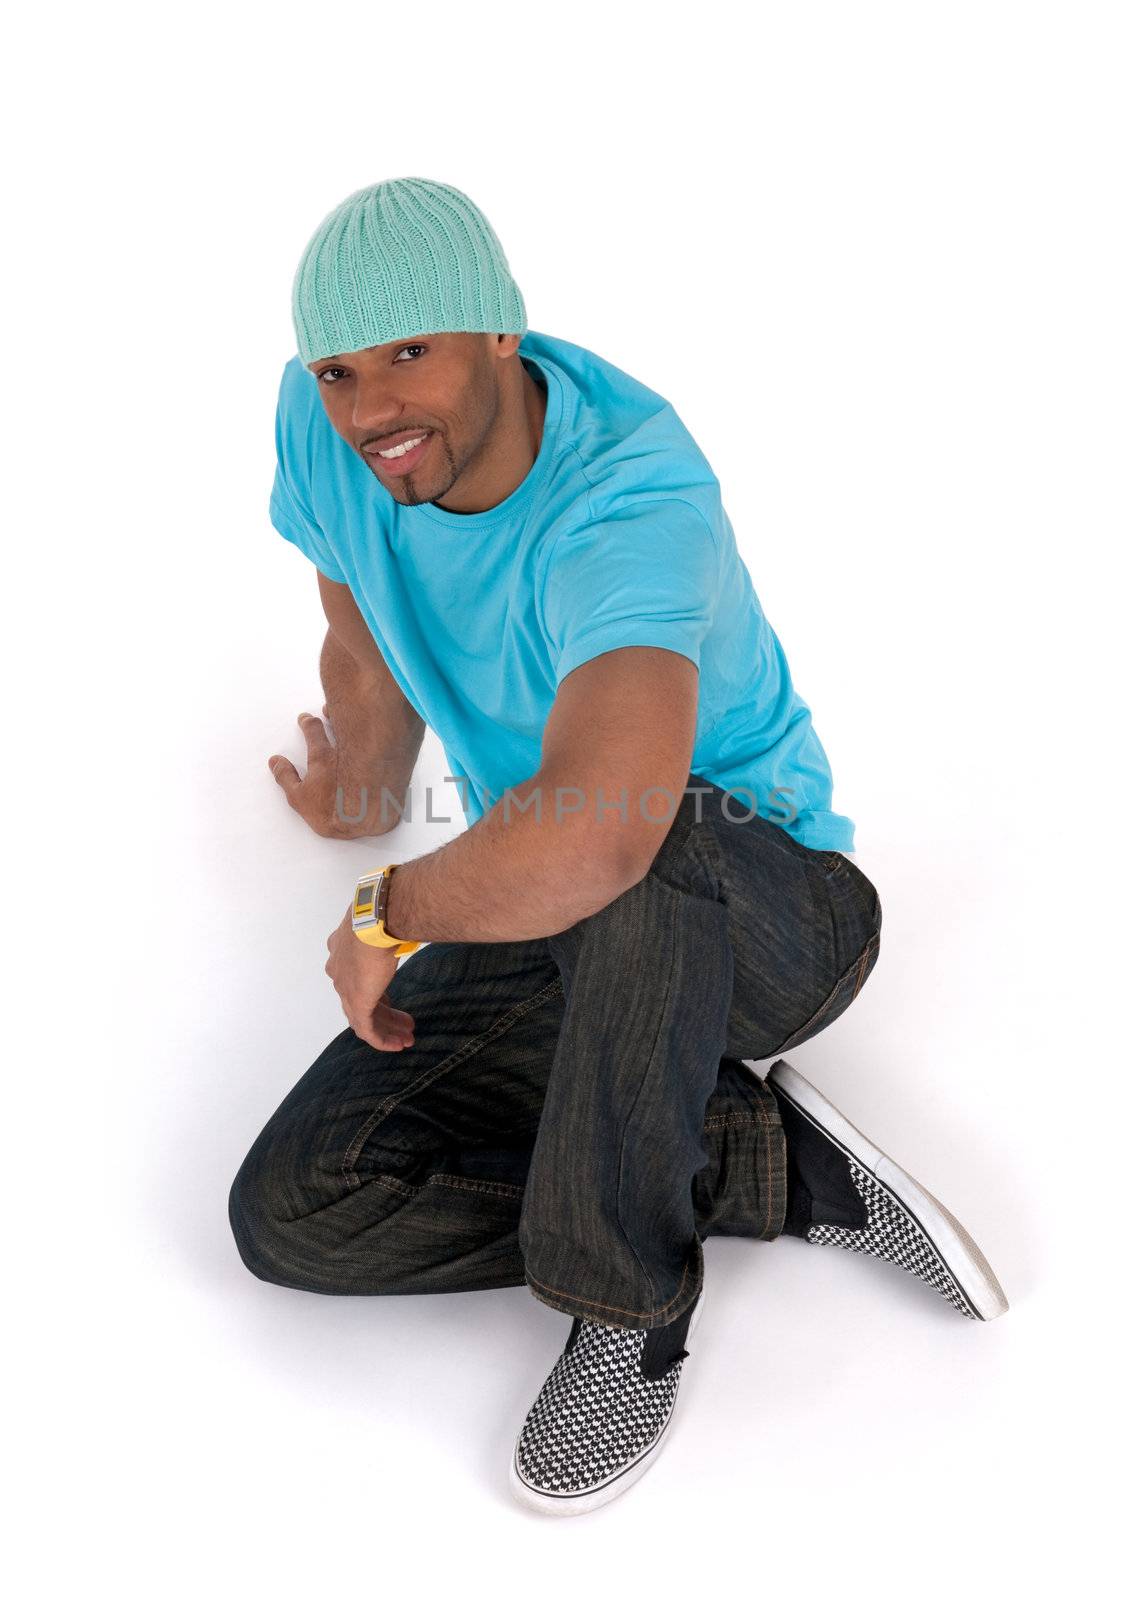 Relaxed young man in a blue t-shirt sitting on the floor, smiling. Isolated on white.